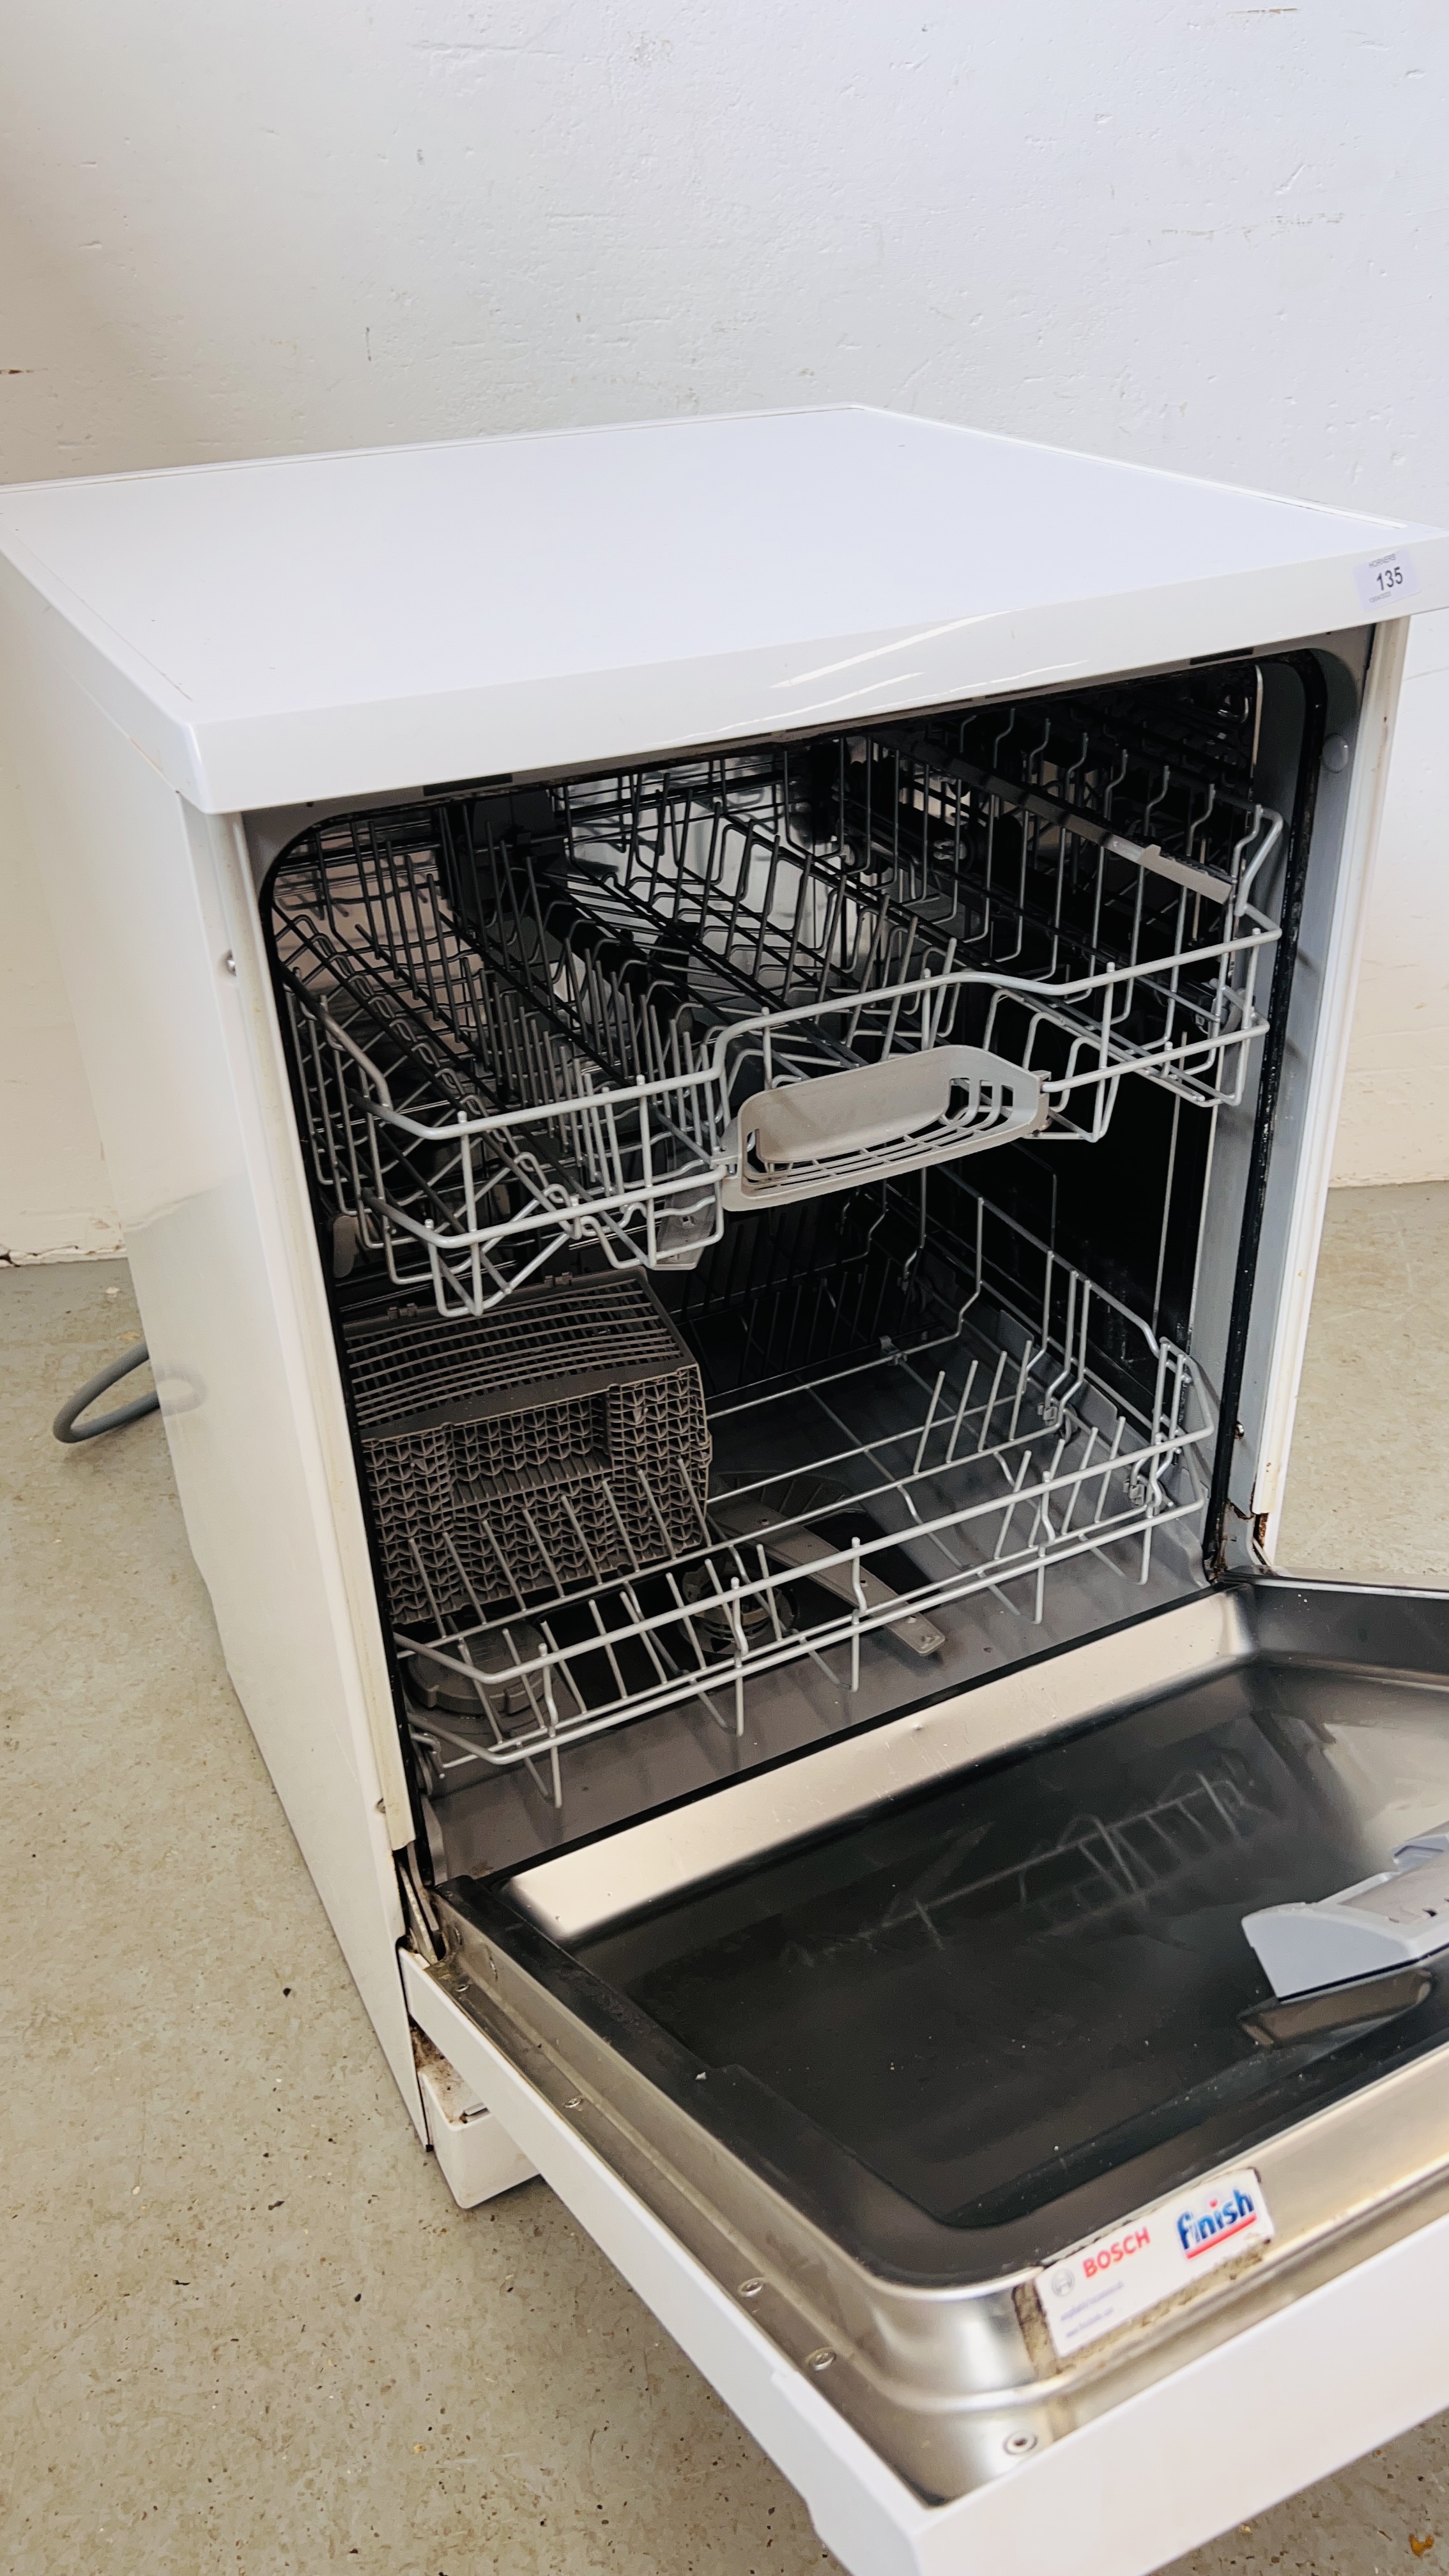 A BOSCH DISHWASHER - SOLD AS SEEN. - Image 6 of 9